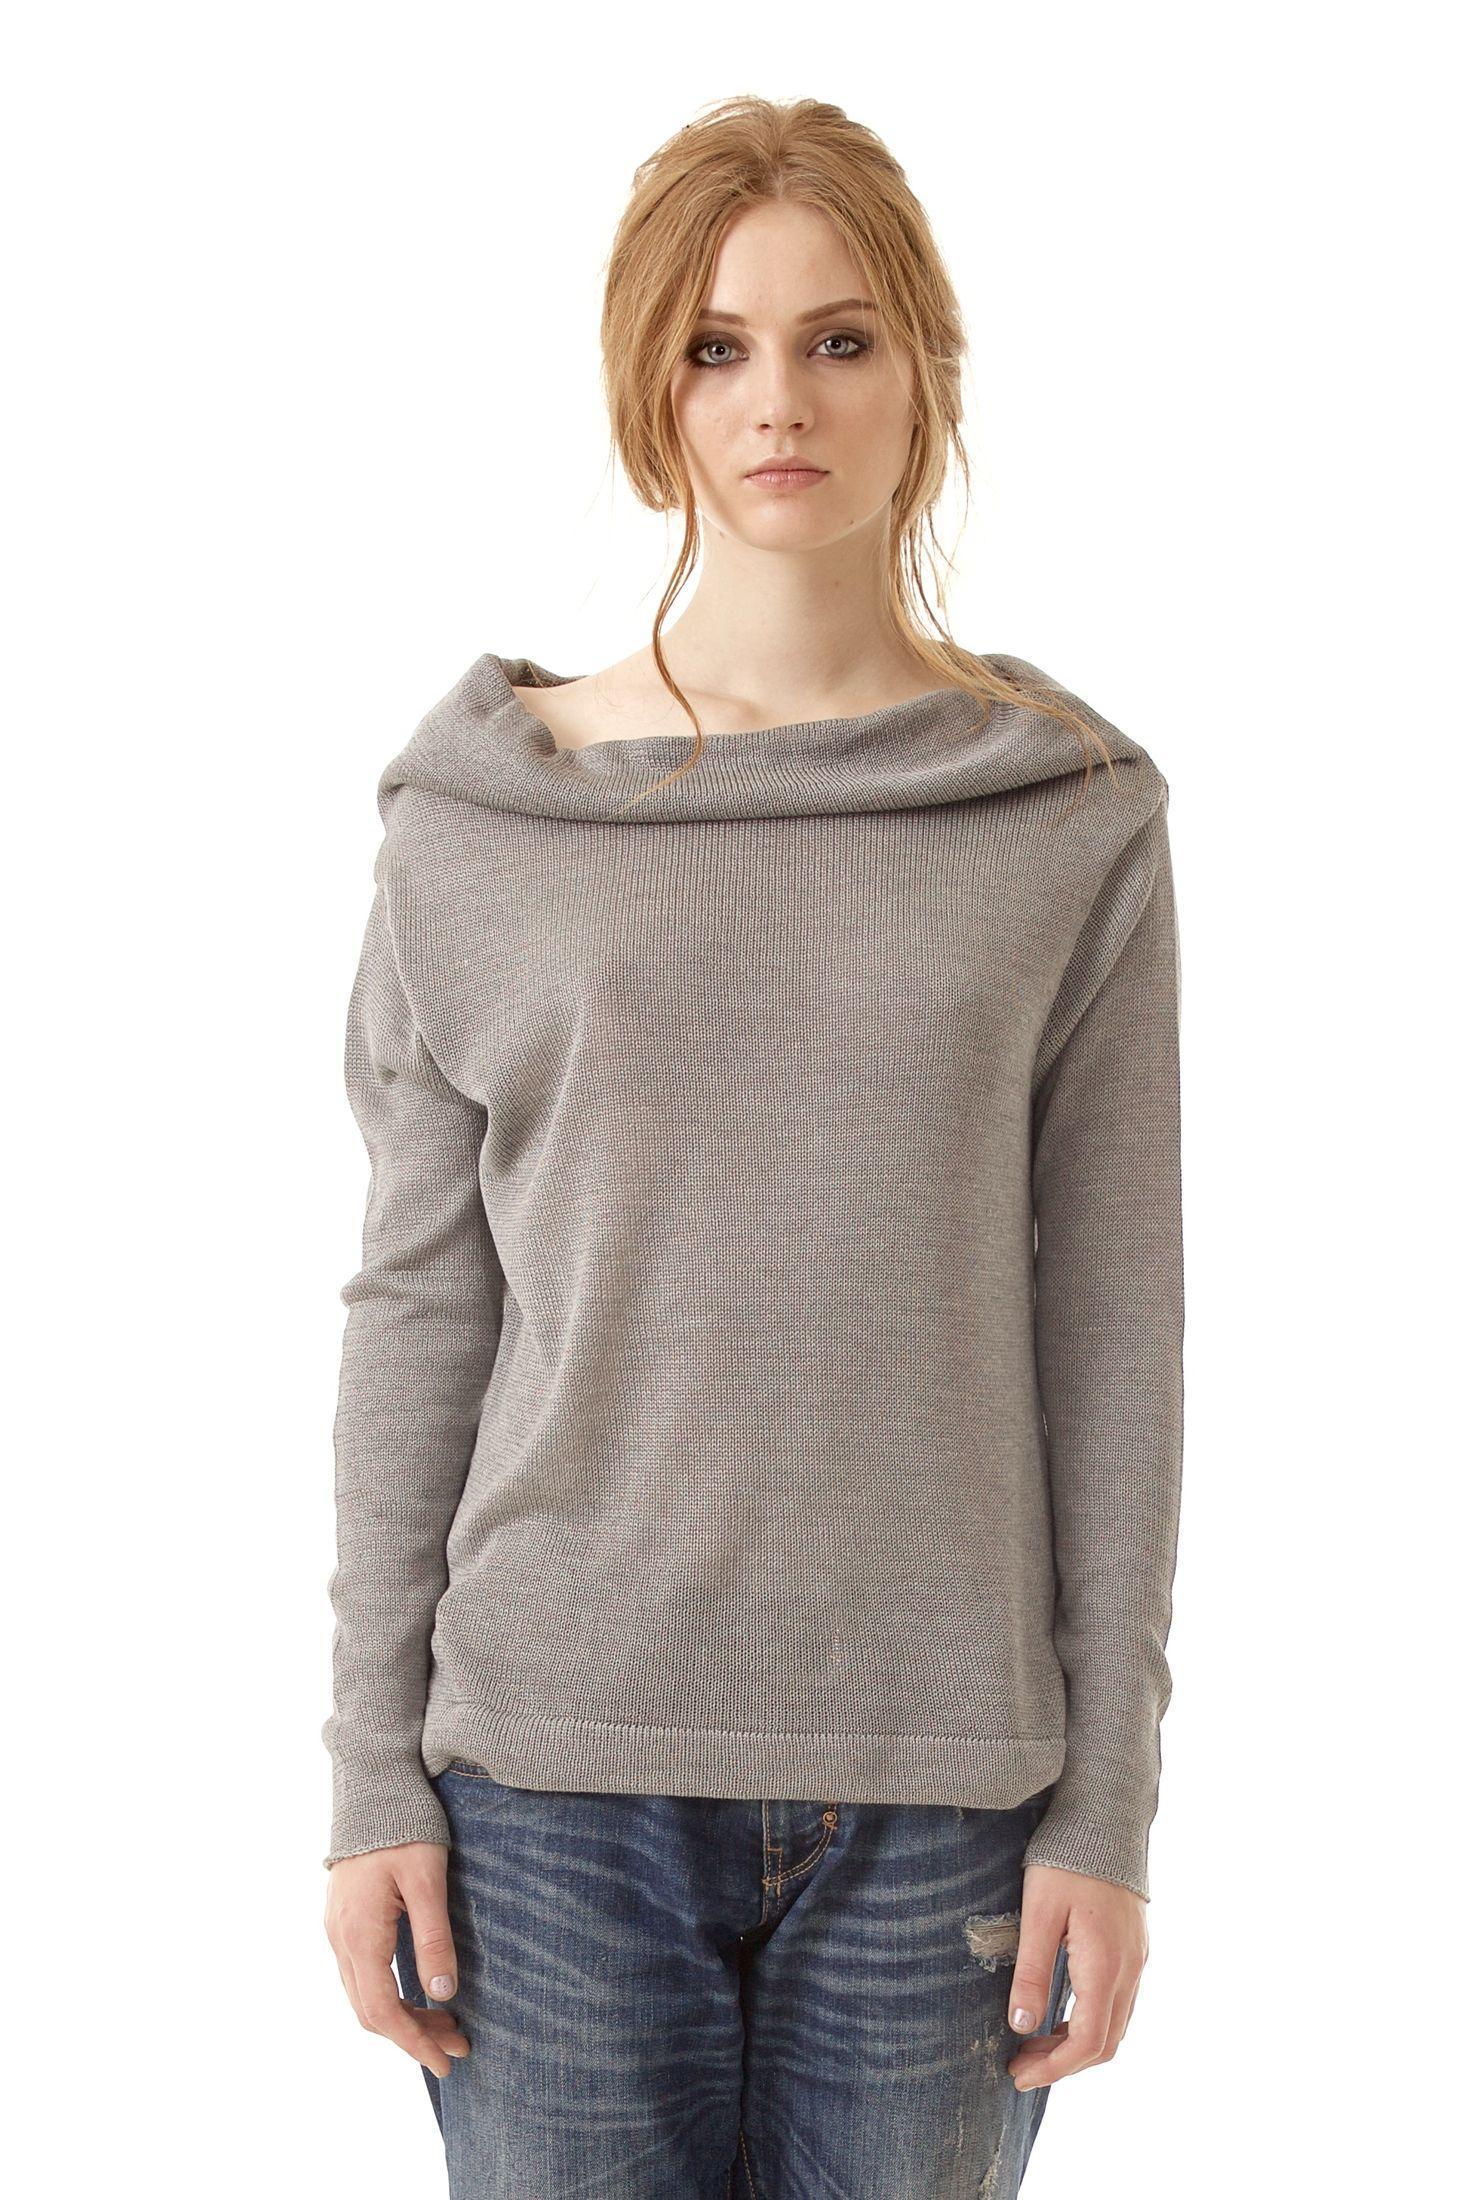 Explore AGNES, Krista Elsta's top off-the-shoulder grey sweater, expertly crafted in 100% Italian cashmere. Its cowl collar and relaxed fit ensure an effortlessly chic look suitable for any occasion.